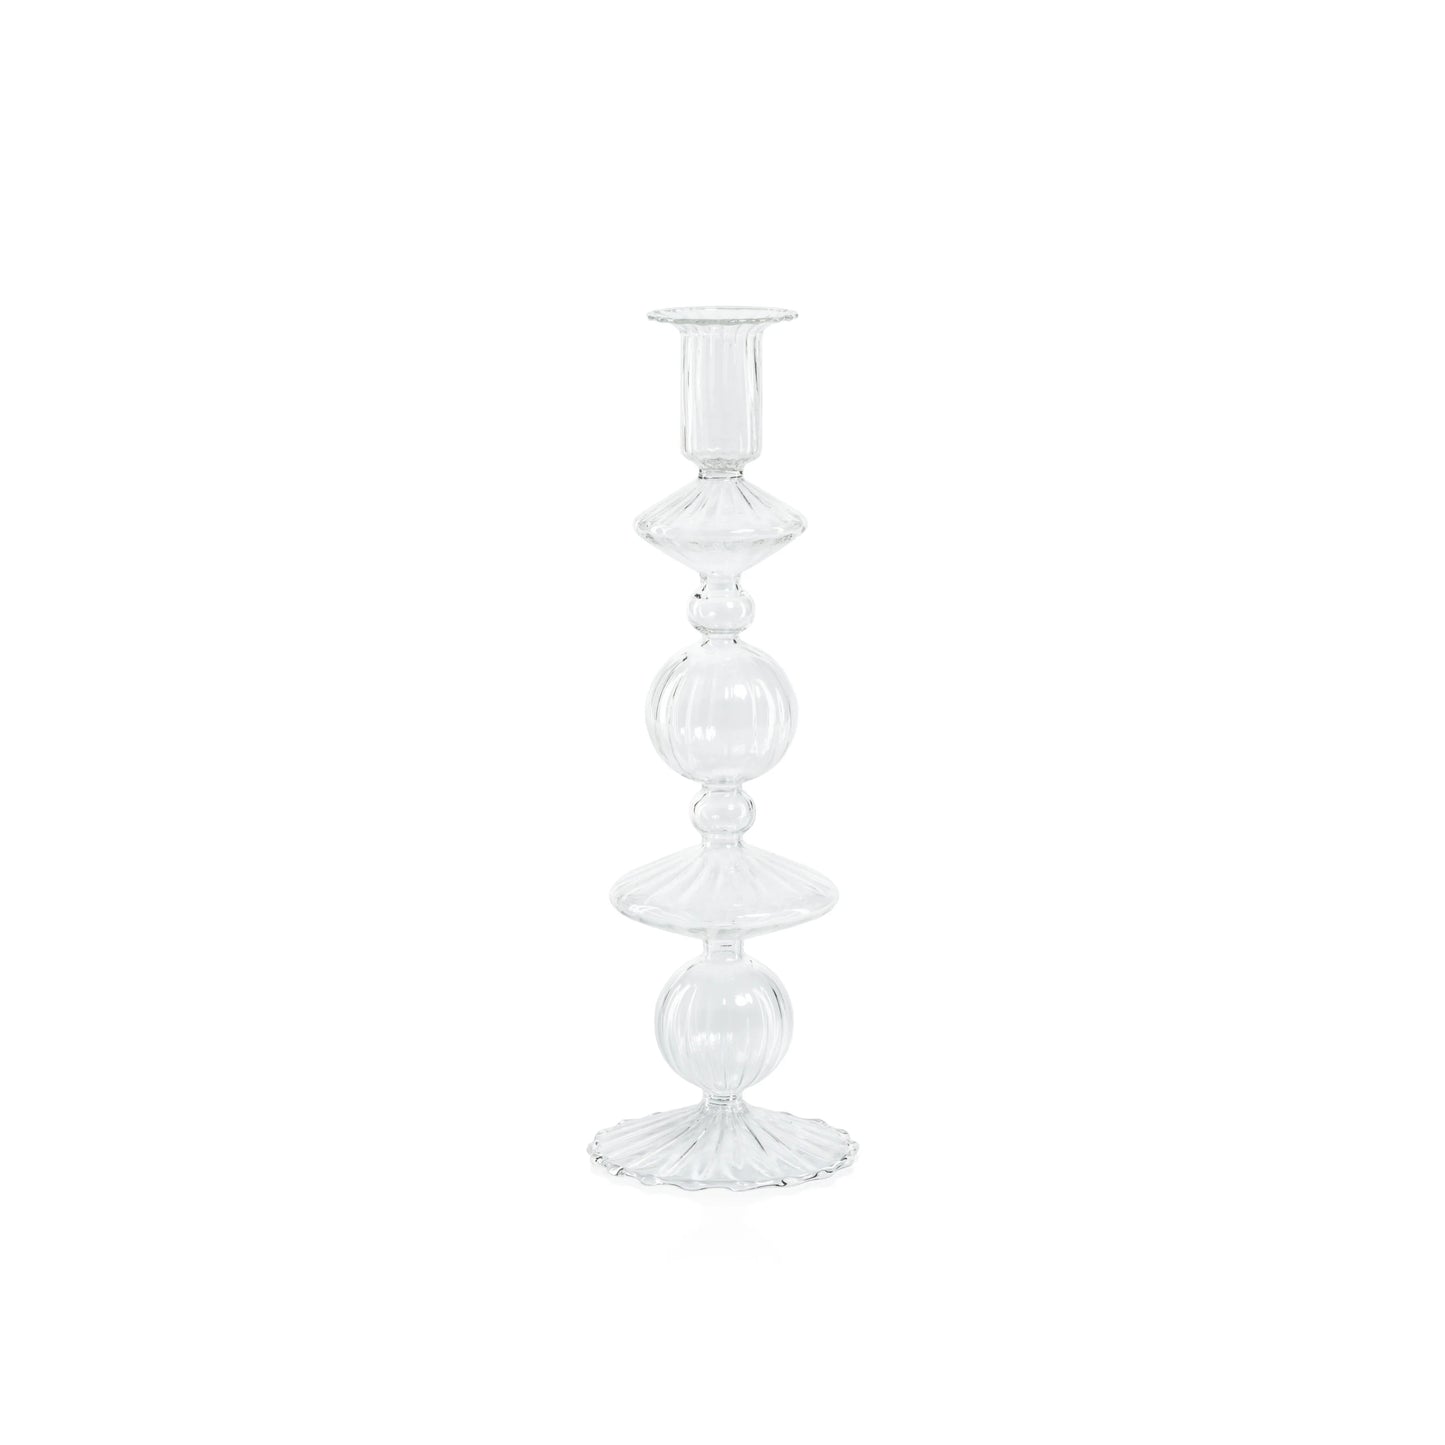 Lucerna Glass Taper Holder Clear - 10.75 inches